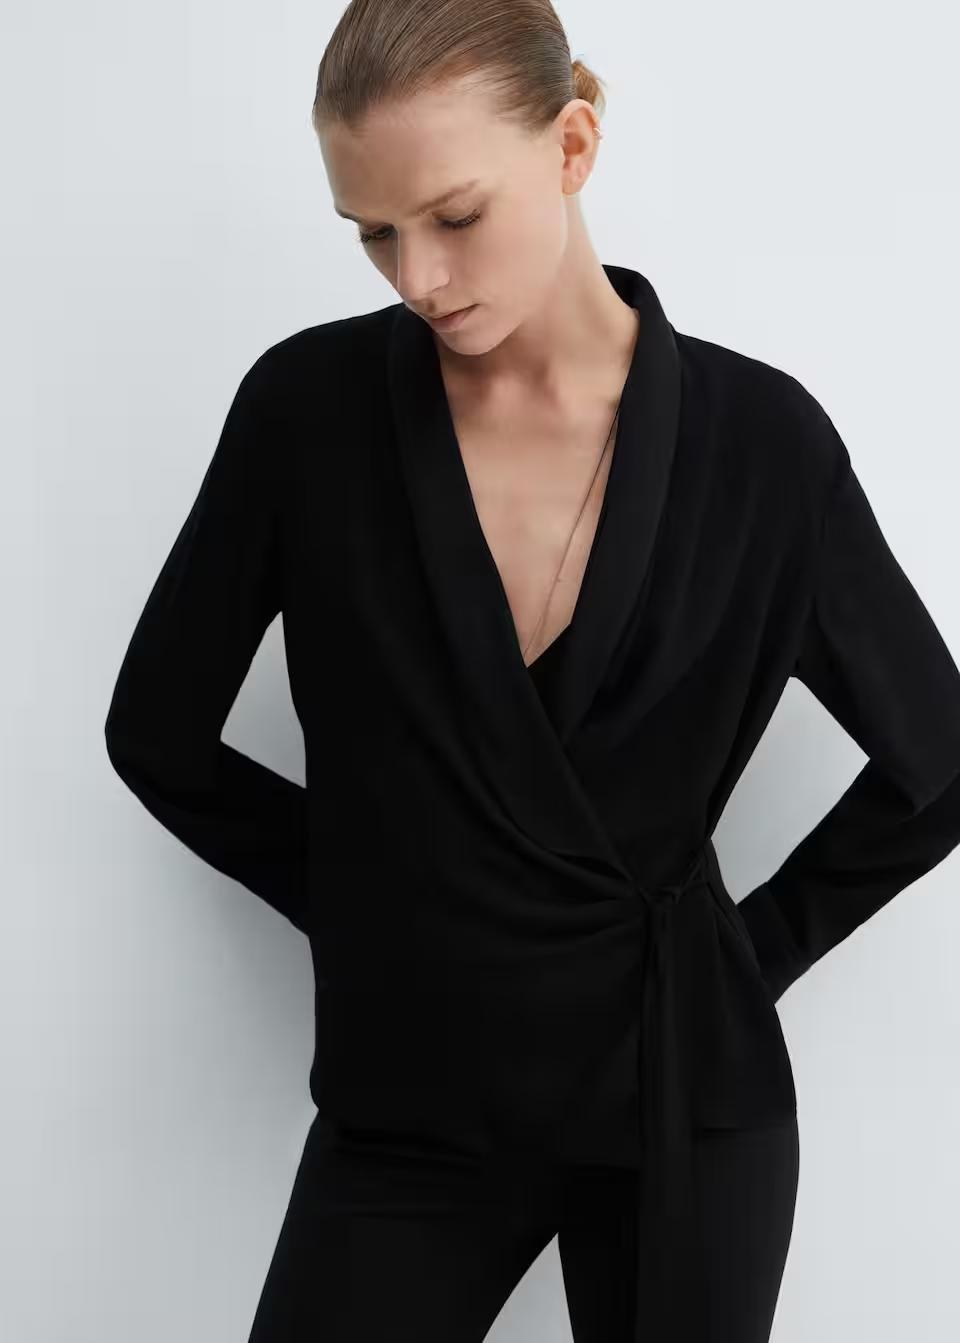 Mango - Black Double-Breasted Blouse With Bow